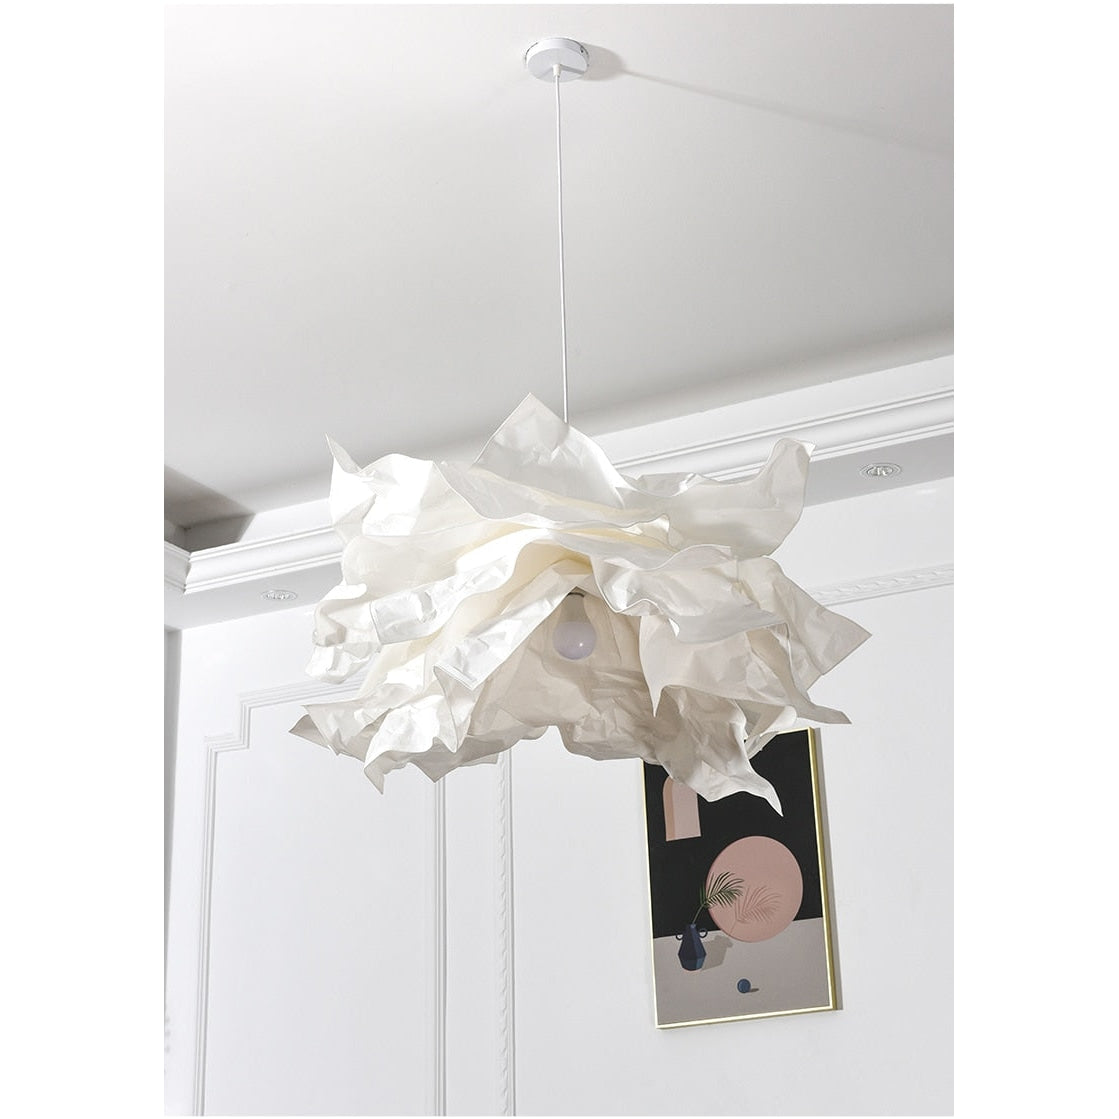 Cloud Pendant Lamp | Modern Paper Light With Adjustable Cord | Great For Dining Room Living - Lamps